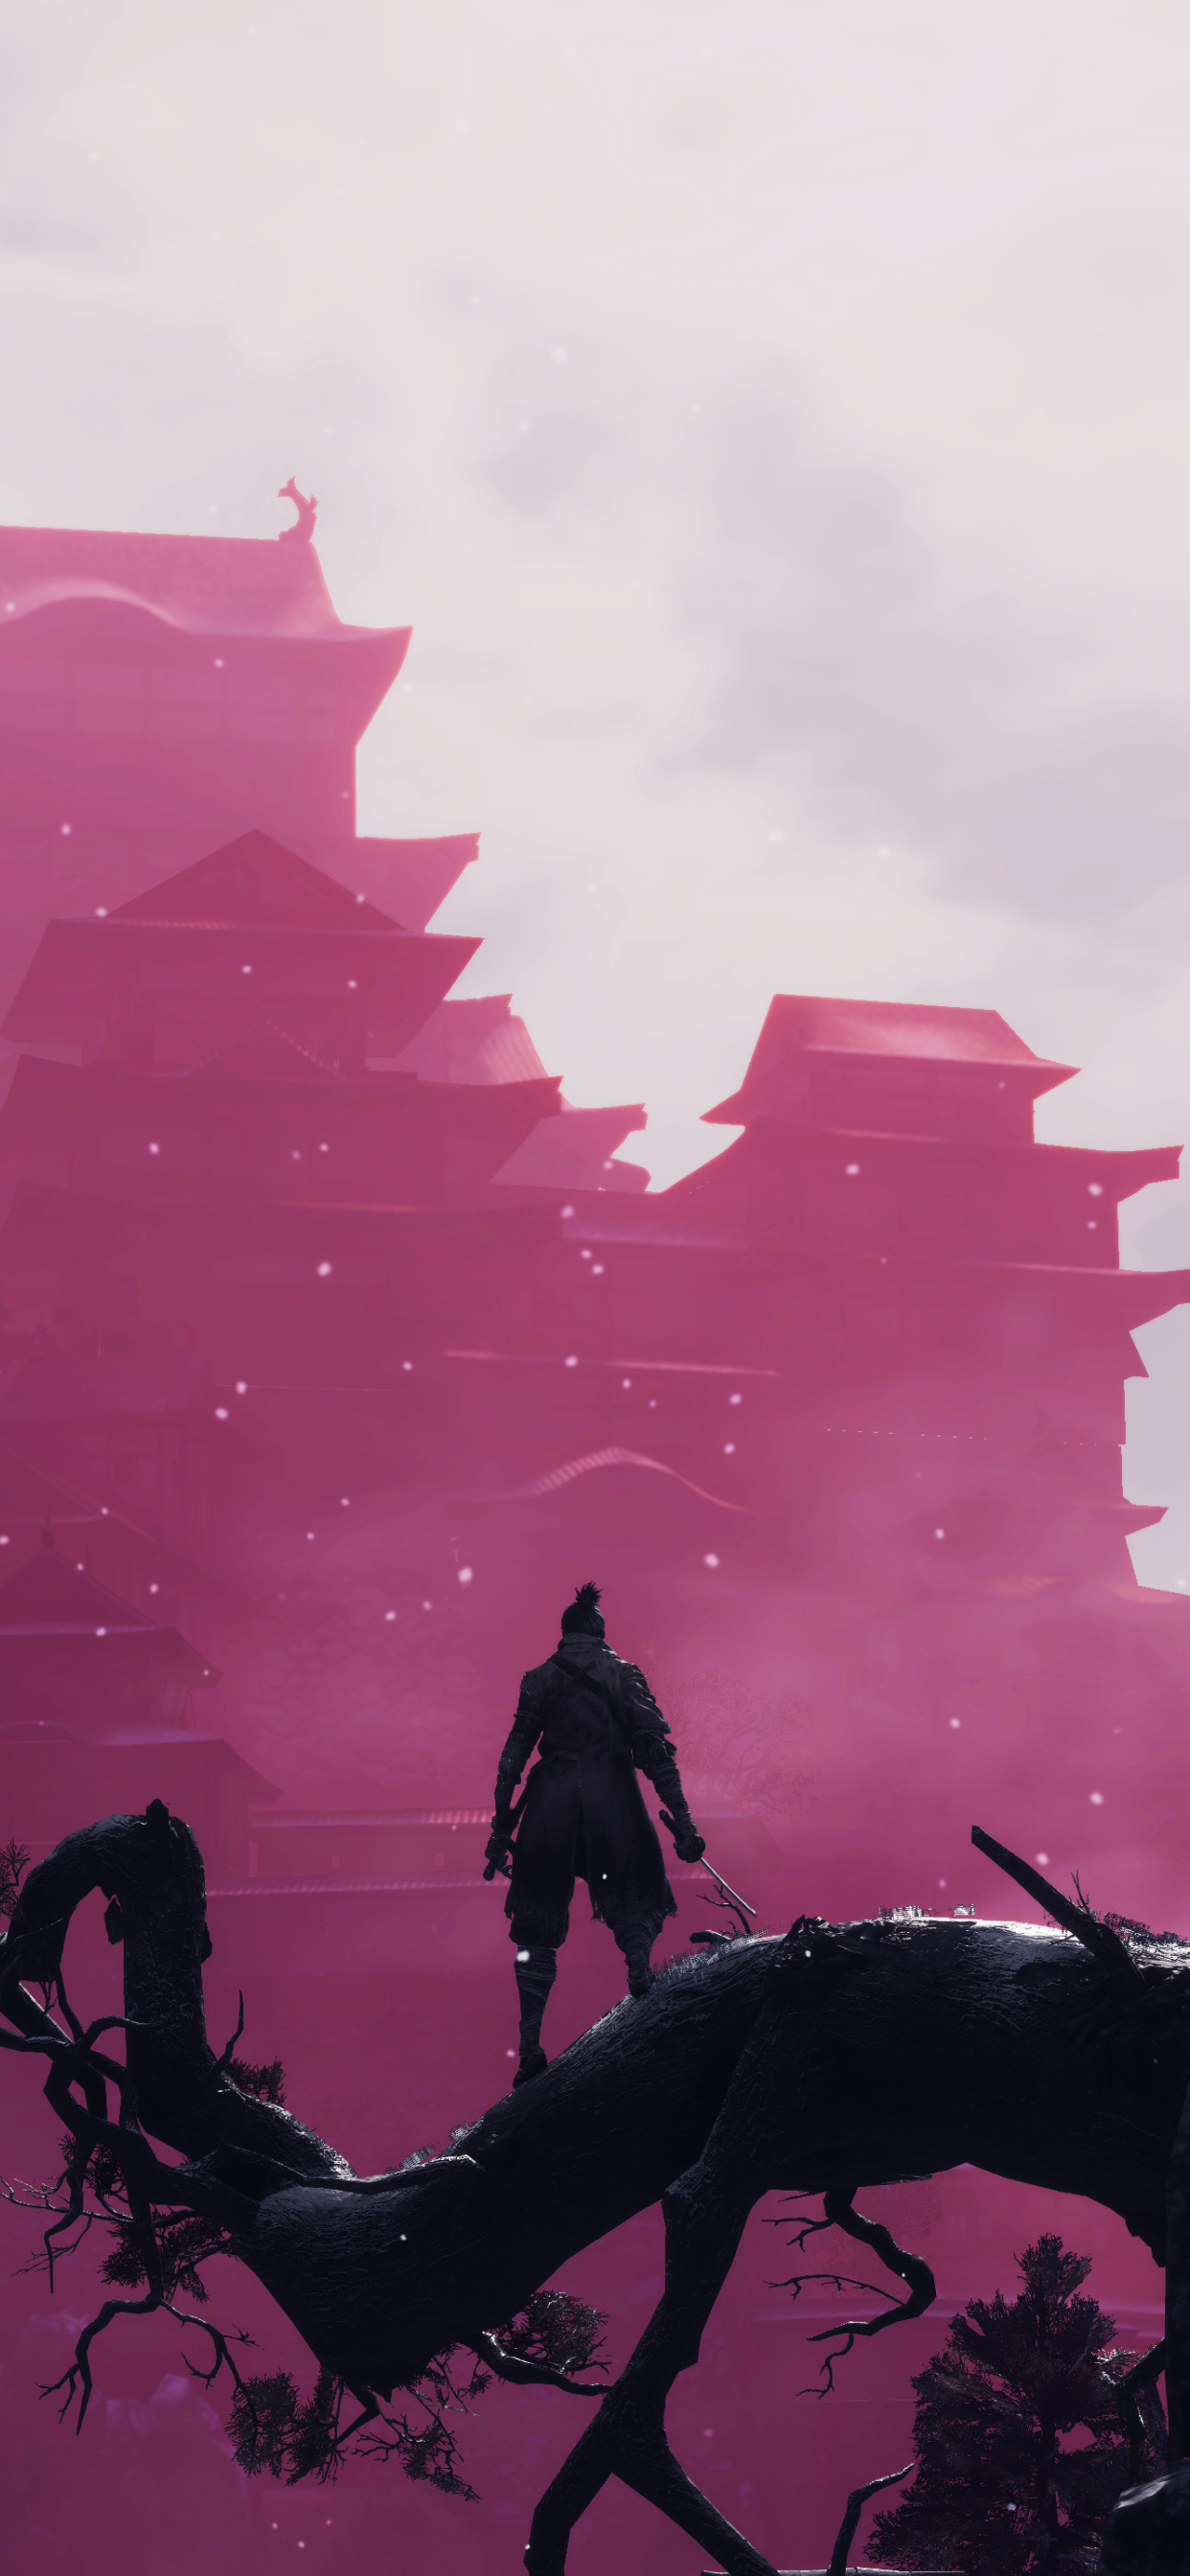 1242x26 Sekiro Shadows Die Twice Game Iphone Xs Max Wallpaper Hd Games 4k Wallpapers Images Photos And Background